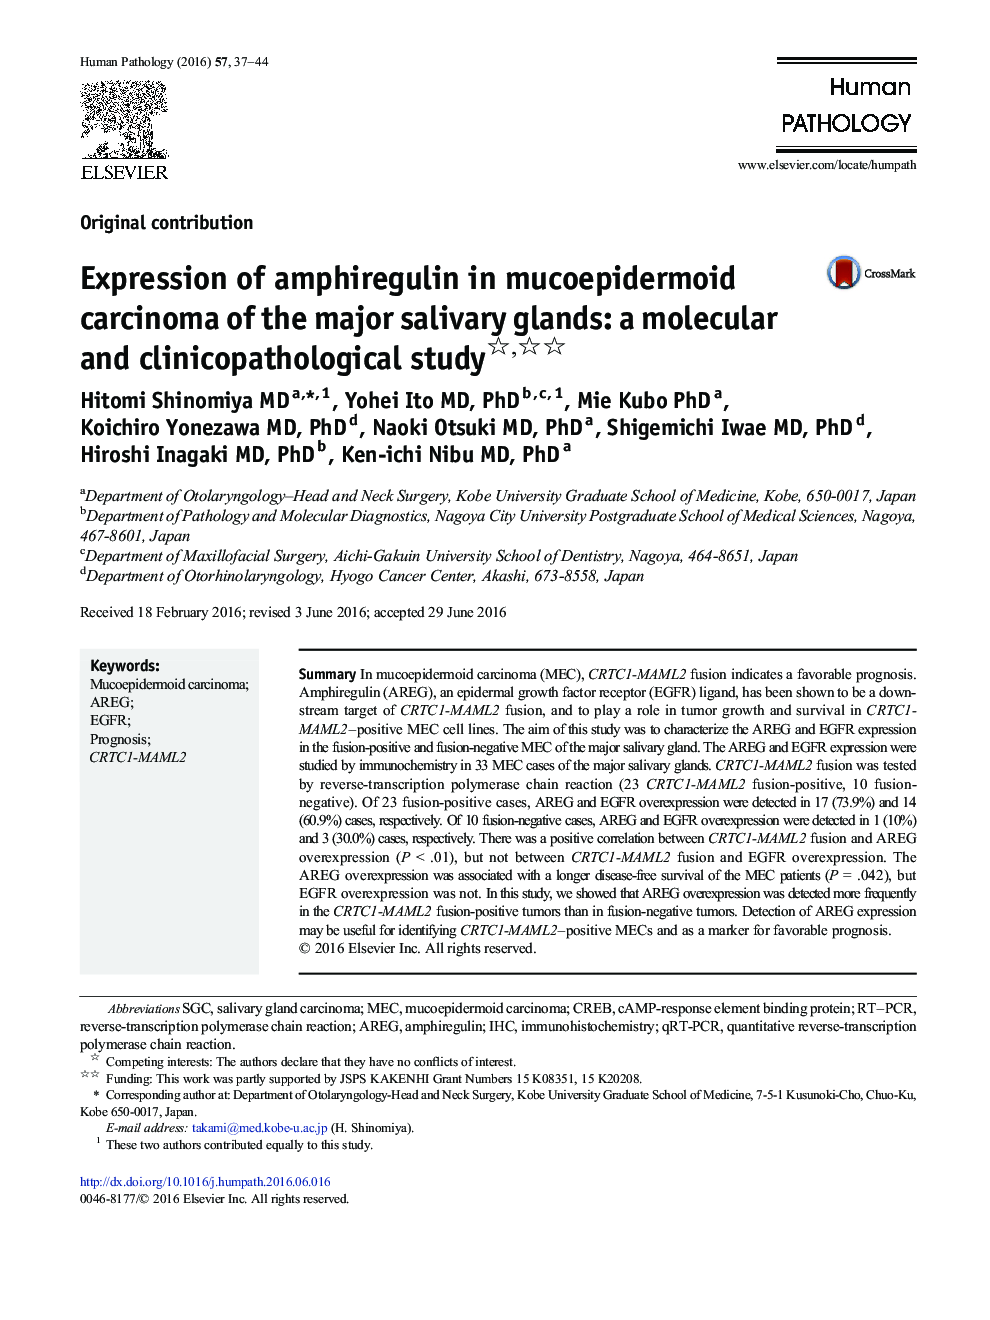 Expression of amphiregulin in mucoepidermoid carcinoma of the major salivary glands: a molecular and clinicopathological study